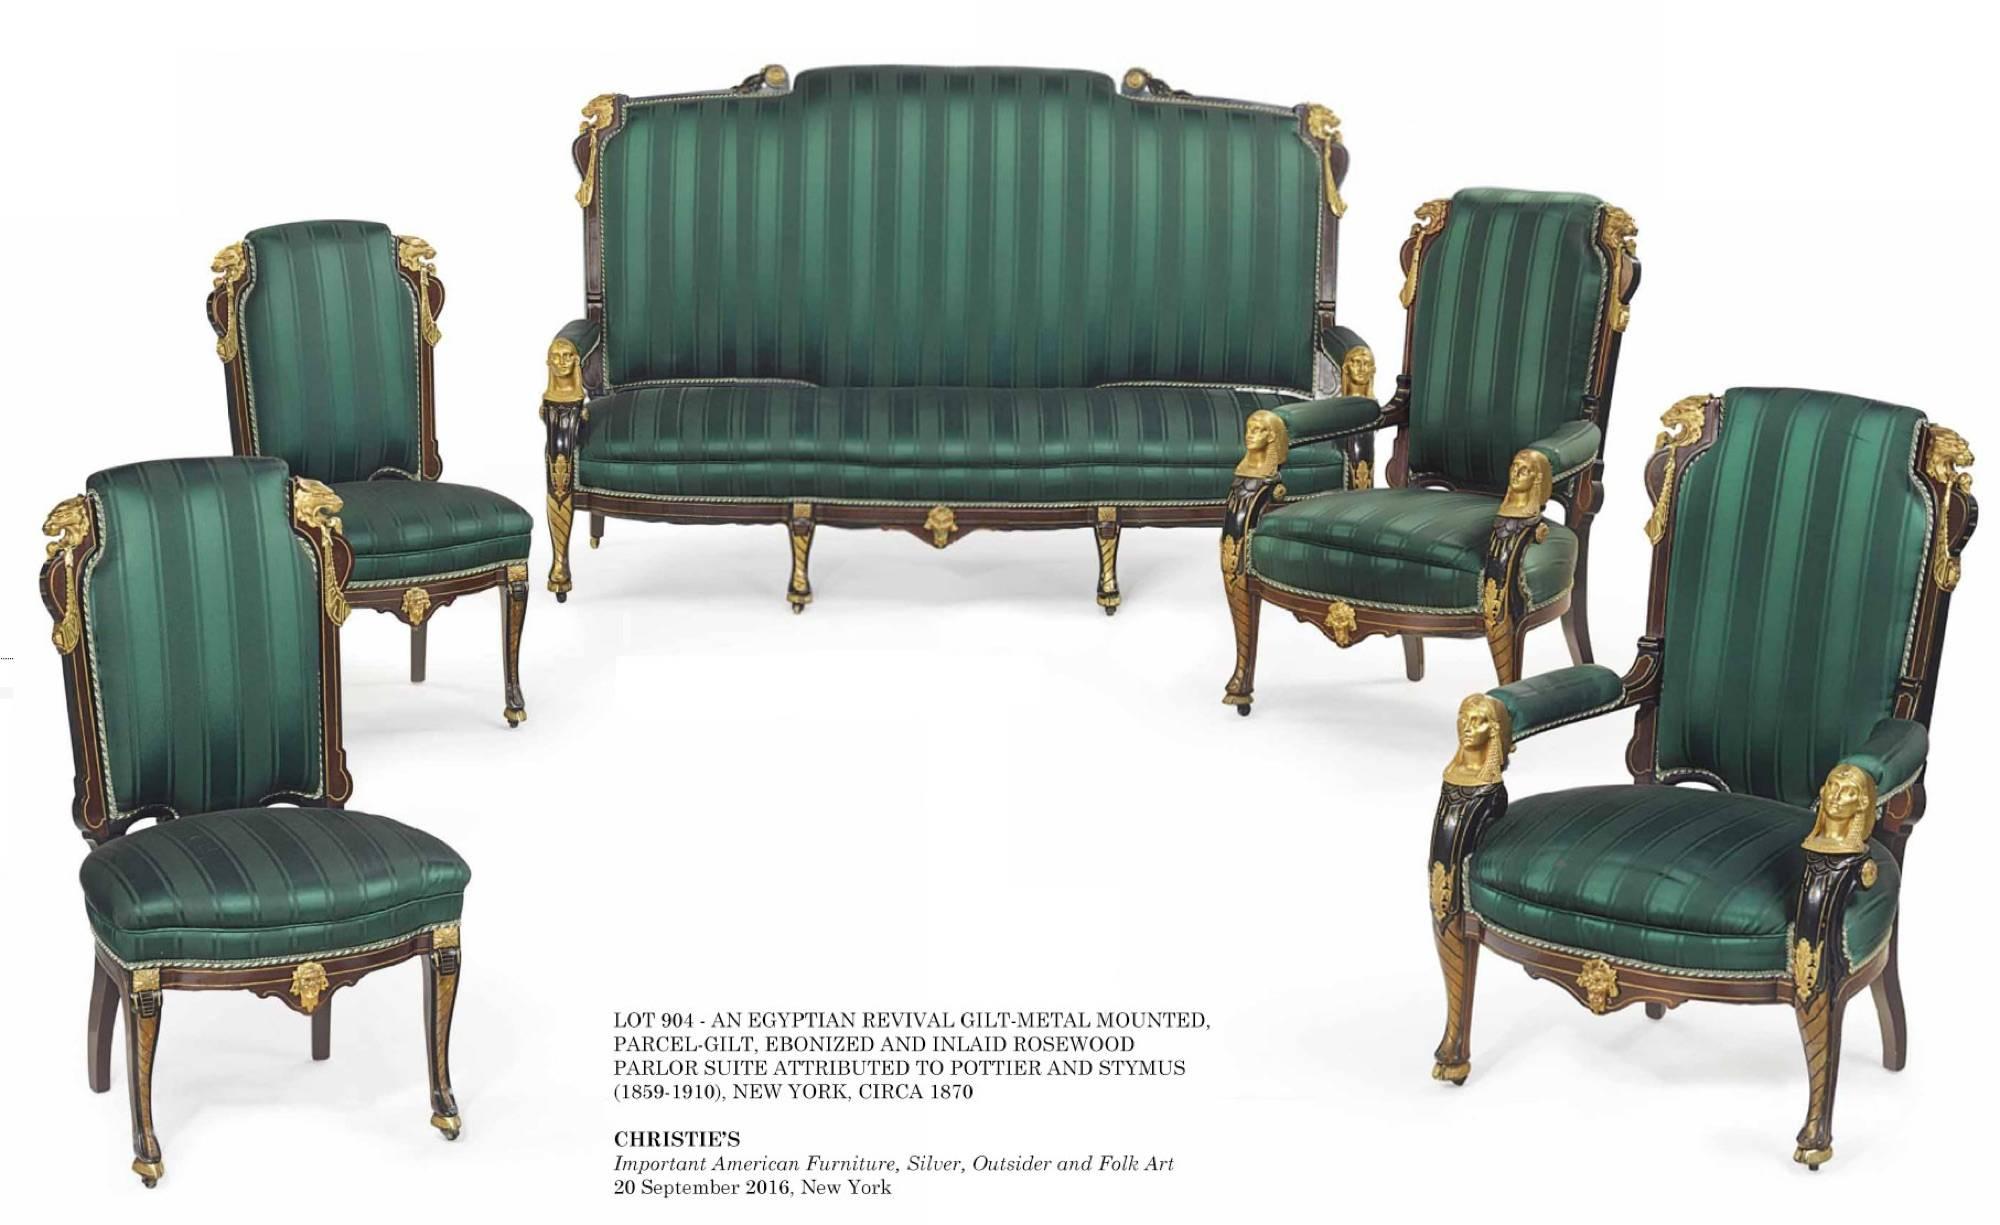 Renaissance Revival Gilt-Metal, Ebonized and Inlaid Rosewood Set of Four Chairs 5